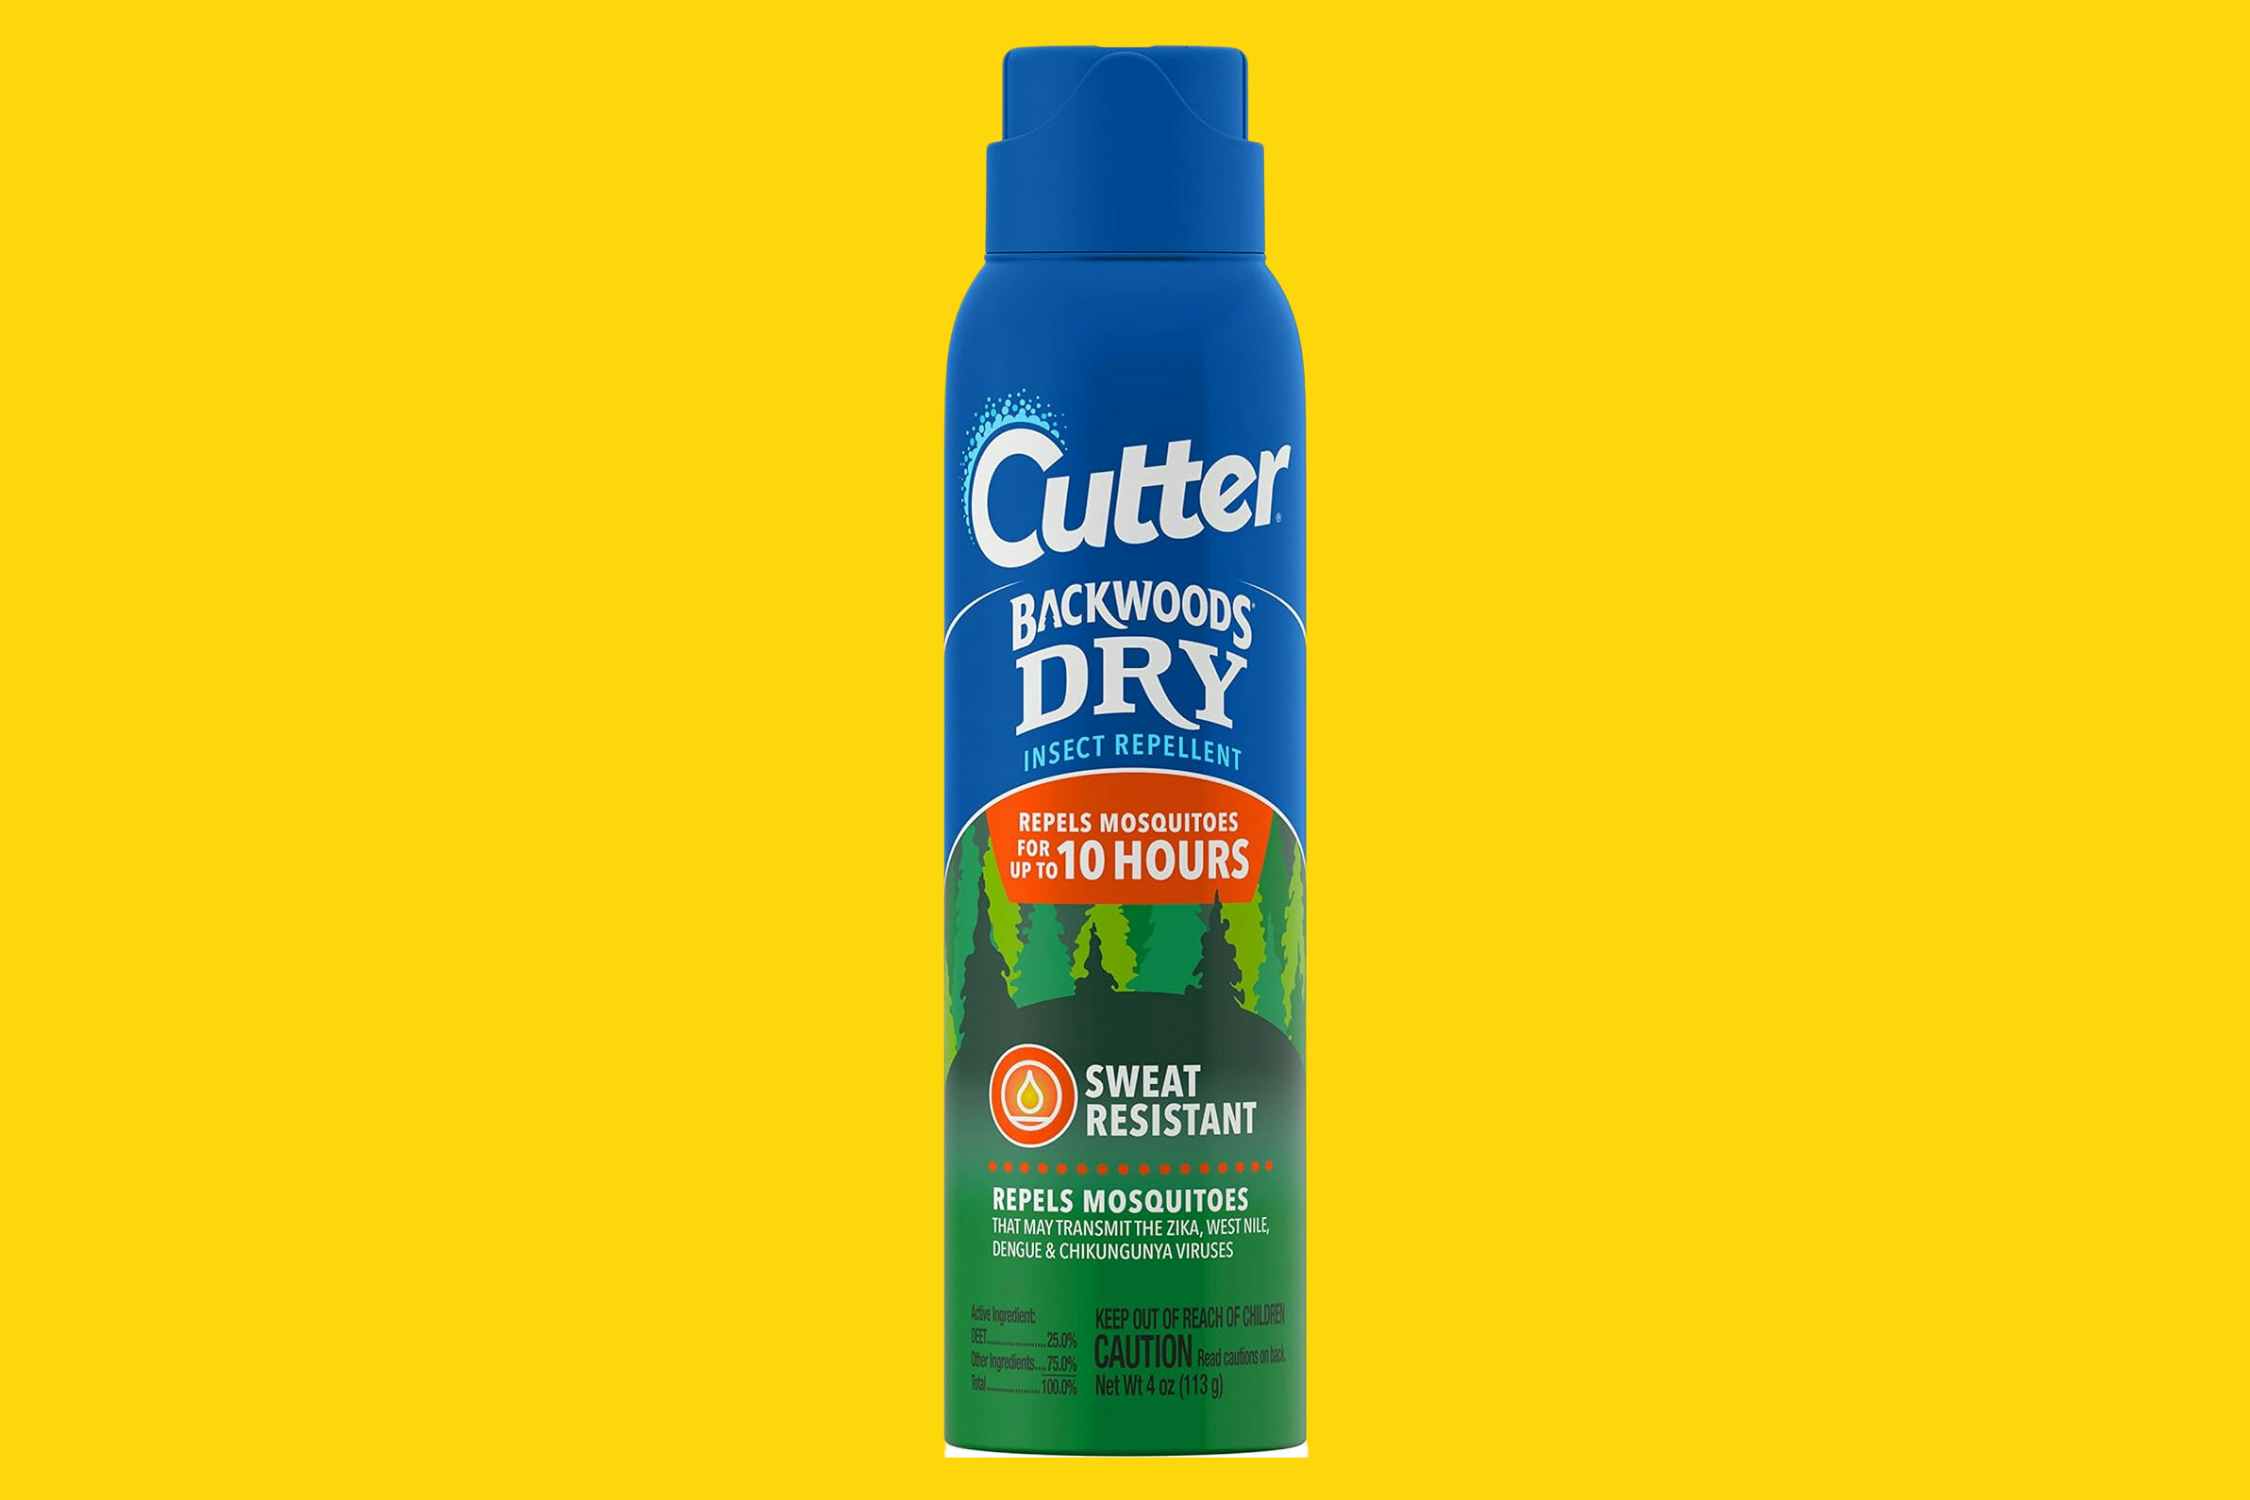 Cutter Backwoods Dry Insect Repellent, Only $3.42 on Amazon (Reg. $7.30)